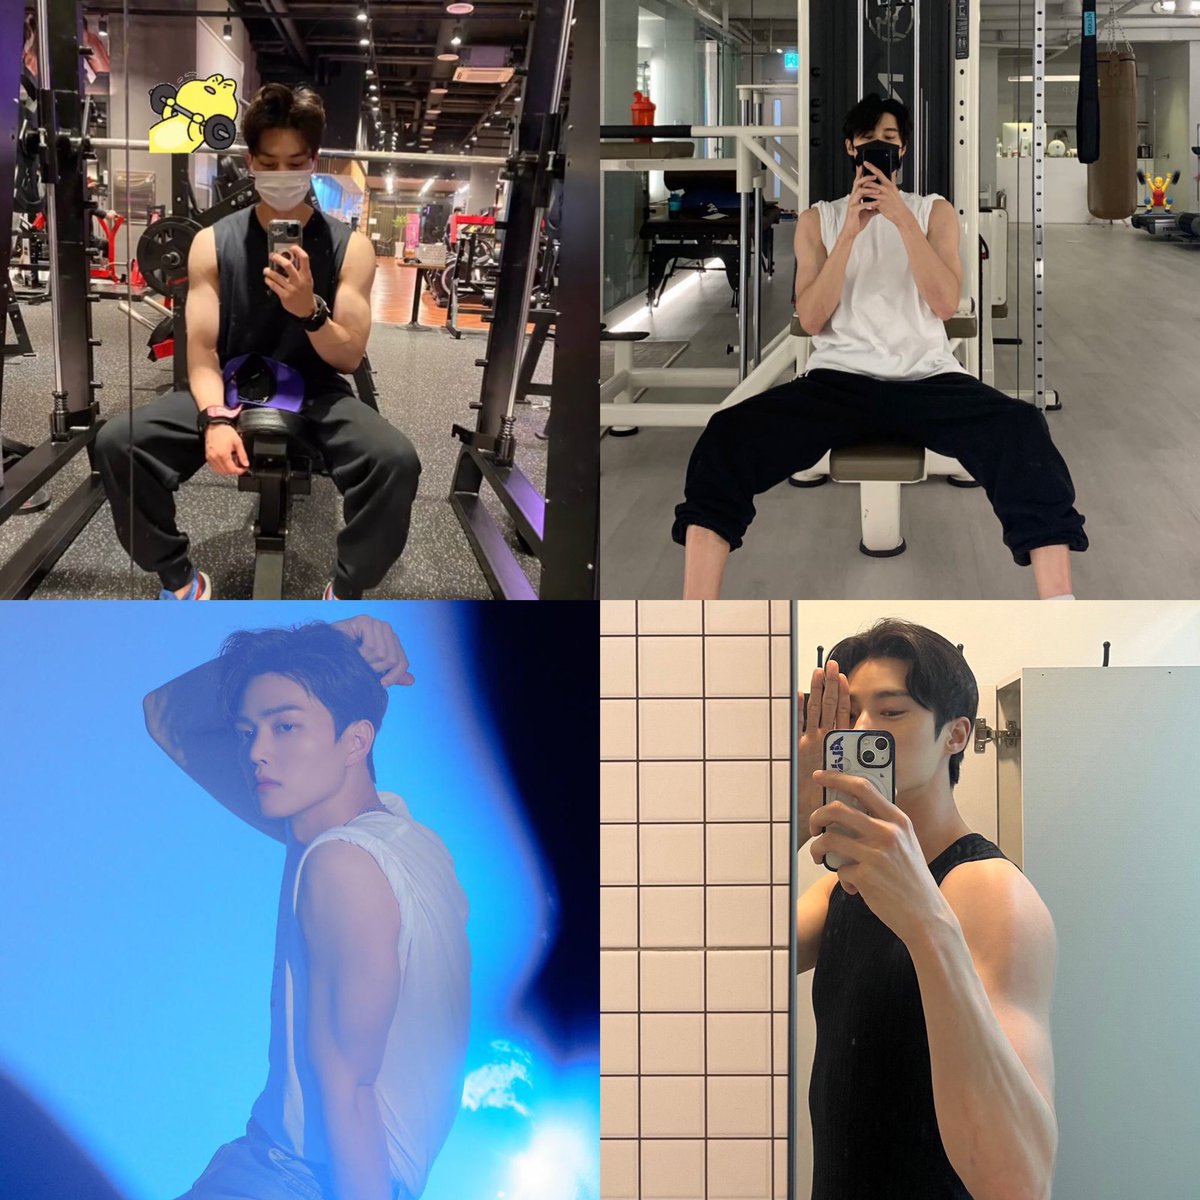 #SongKang and #ByeonWooSeok can be gym buddies look at that arms that biceps they can carry me anywhere they want🫠🫠